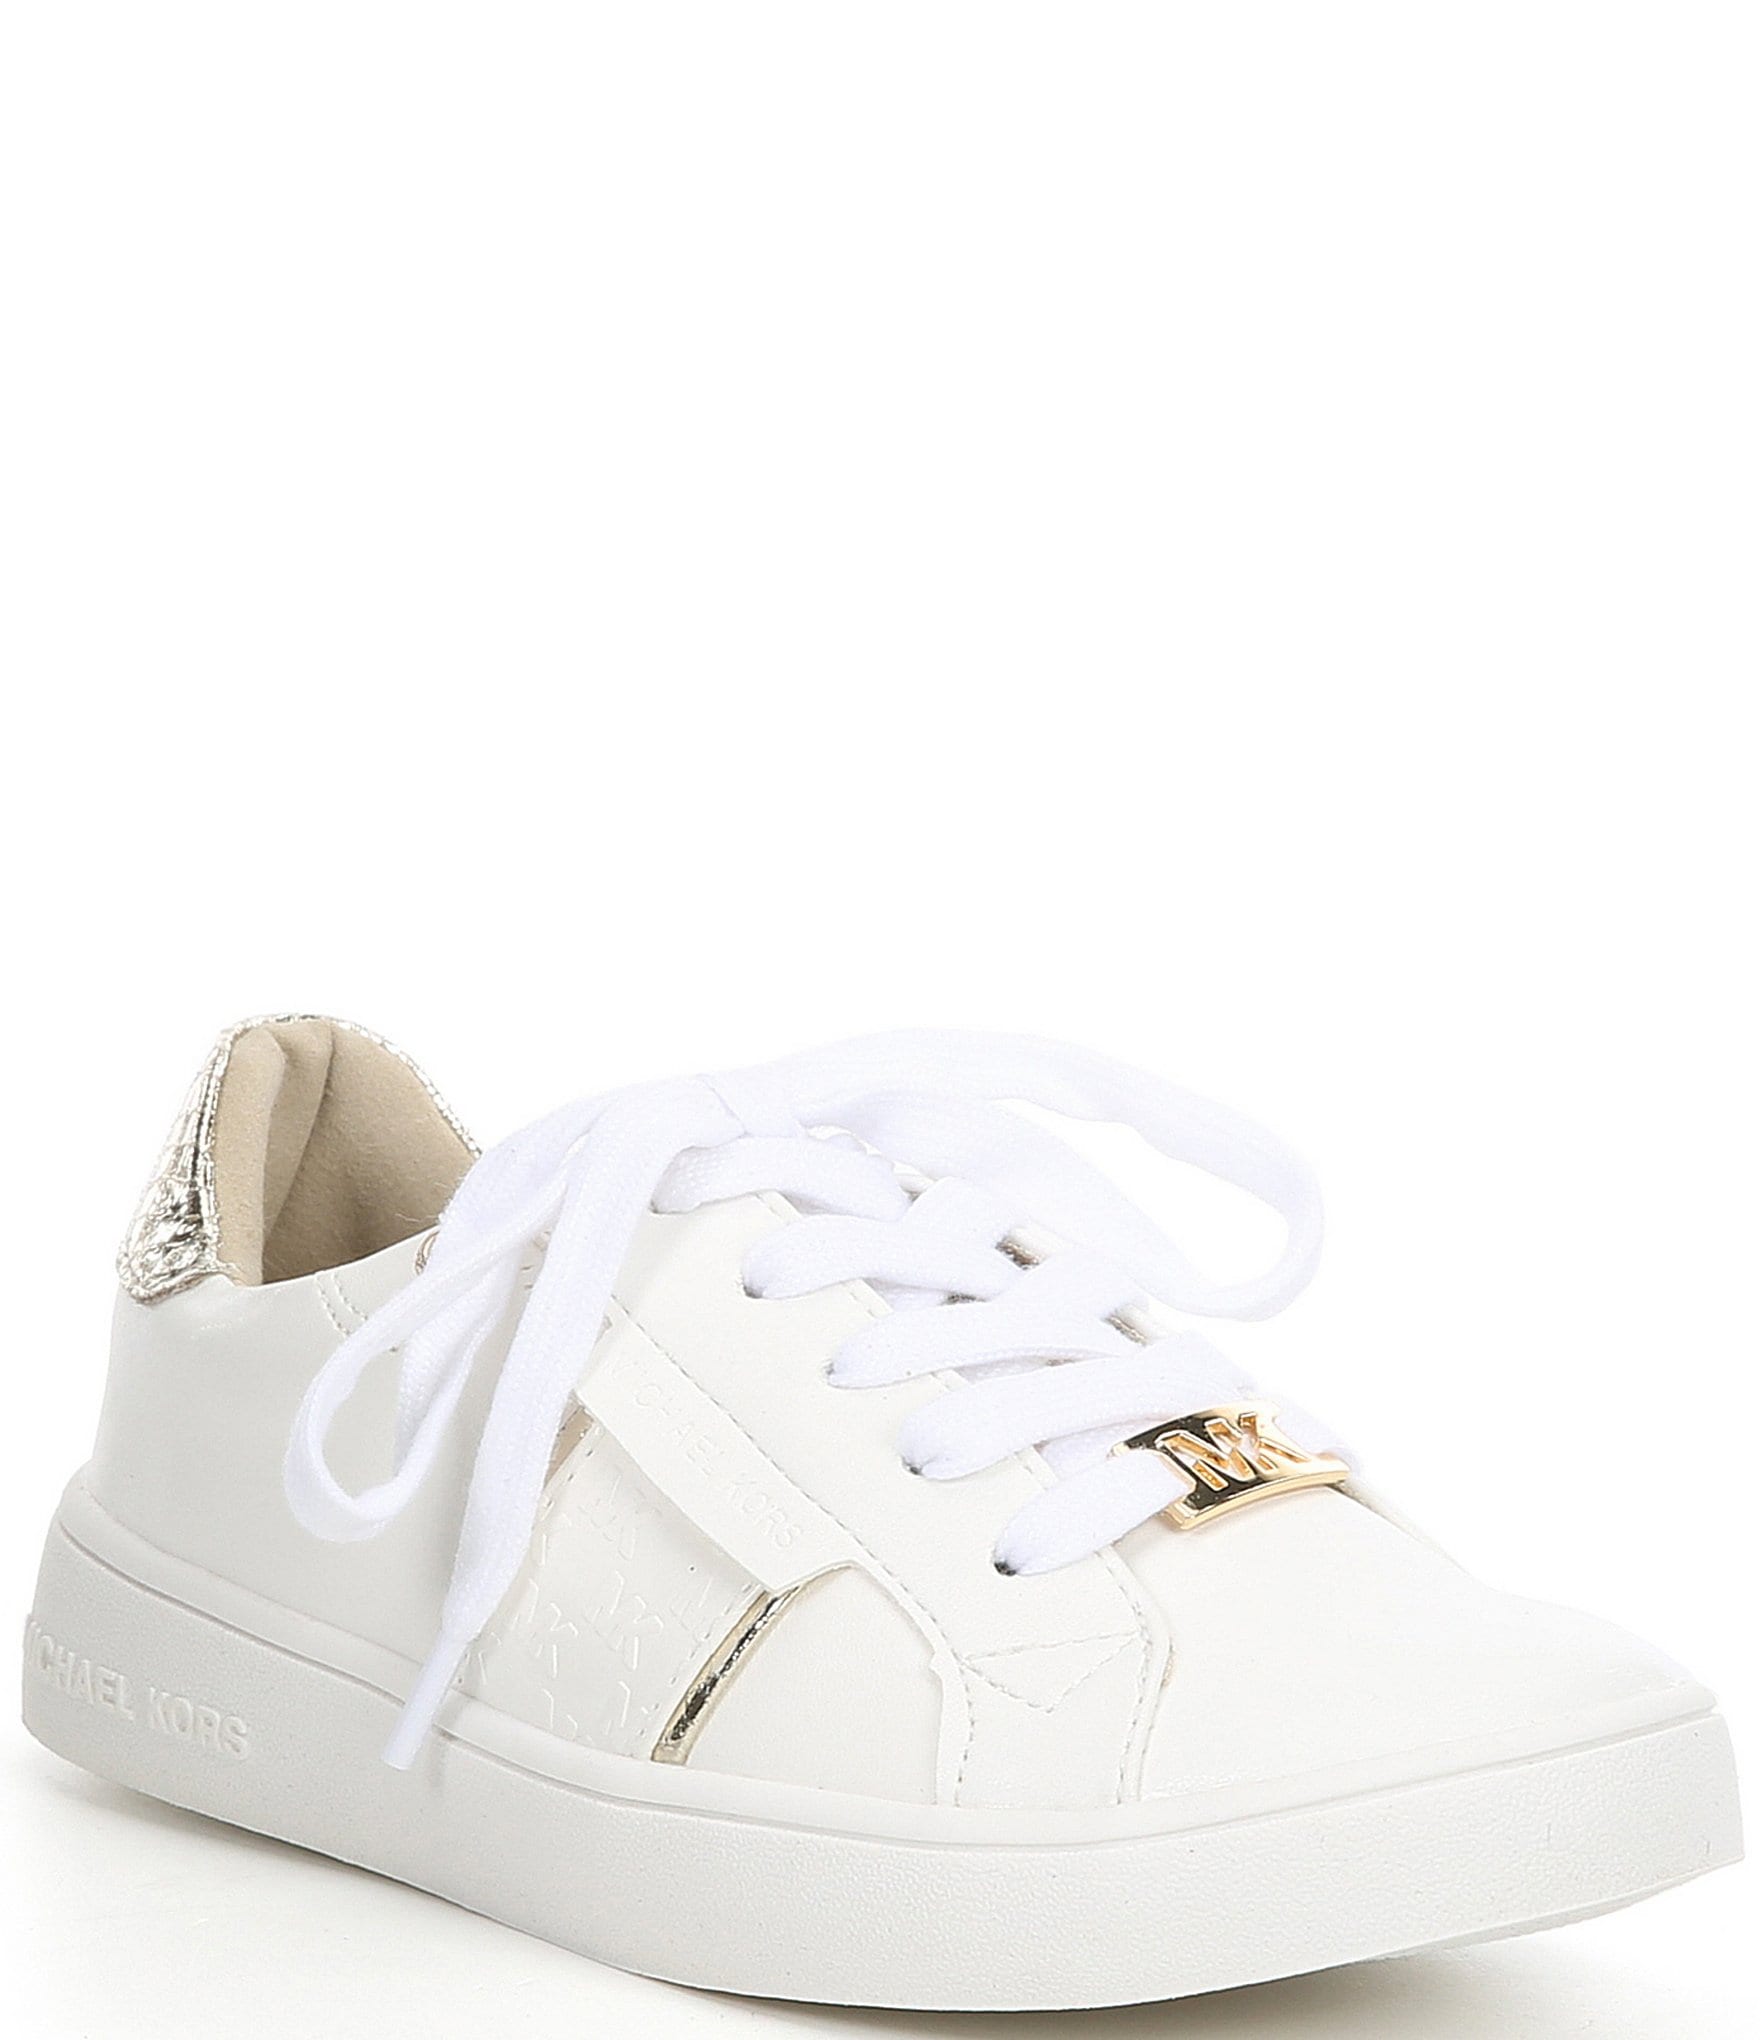 MICHAEL Michael Kors Girls' Jem Adell Lace-Up Sneakers (Toddler ...